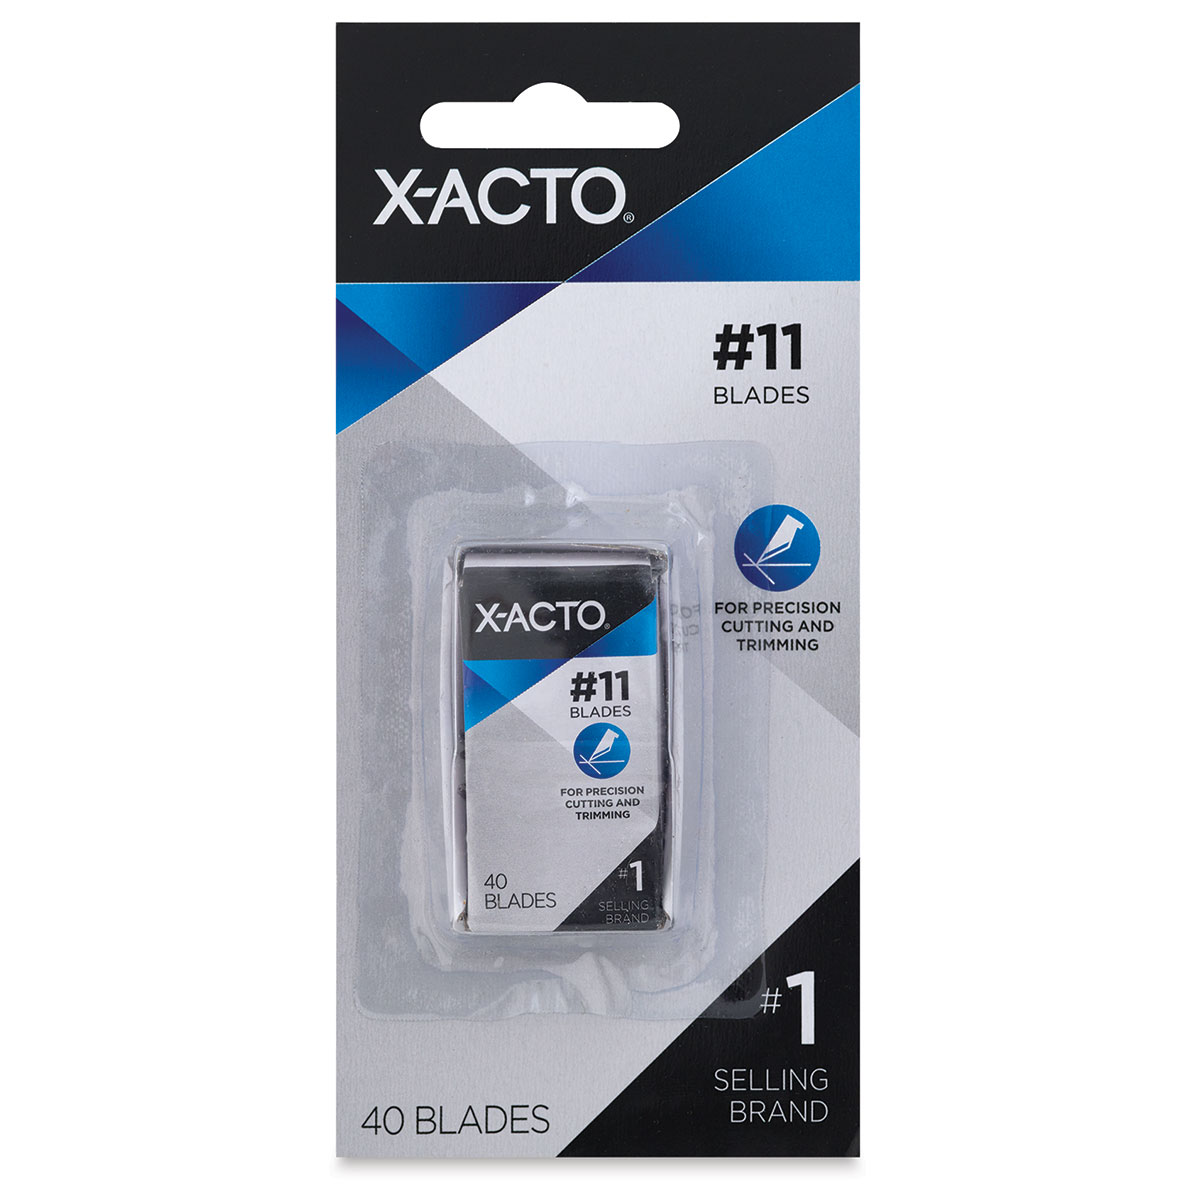 X-acto Z-series No. 11 Blades Z-series #11 Blades Pack Of 100